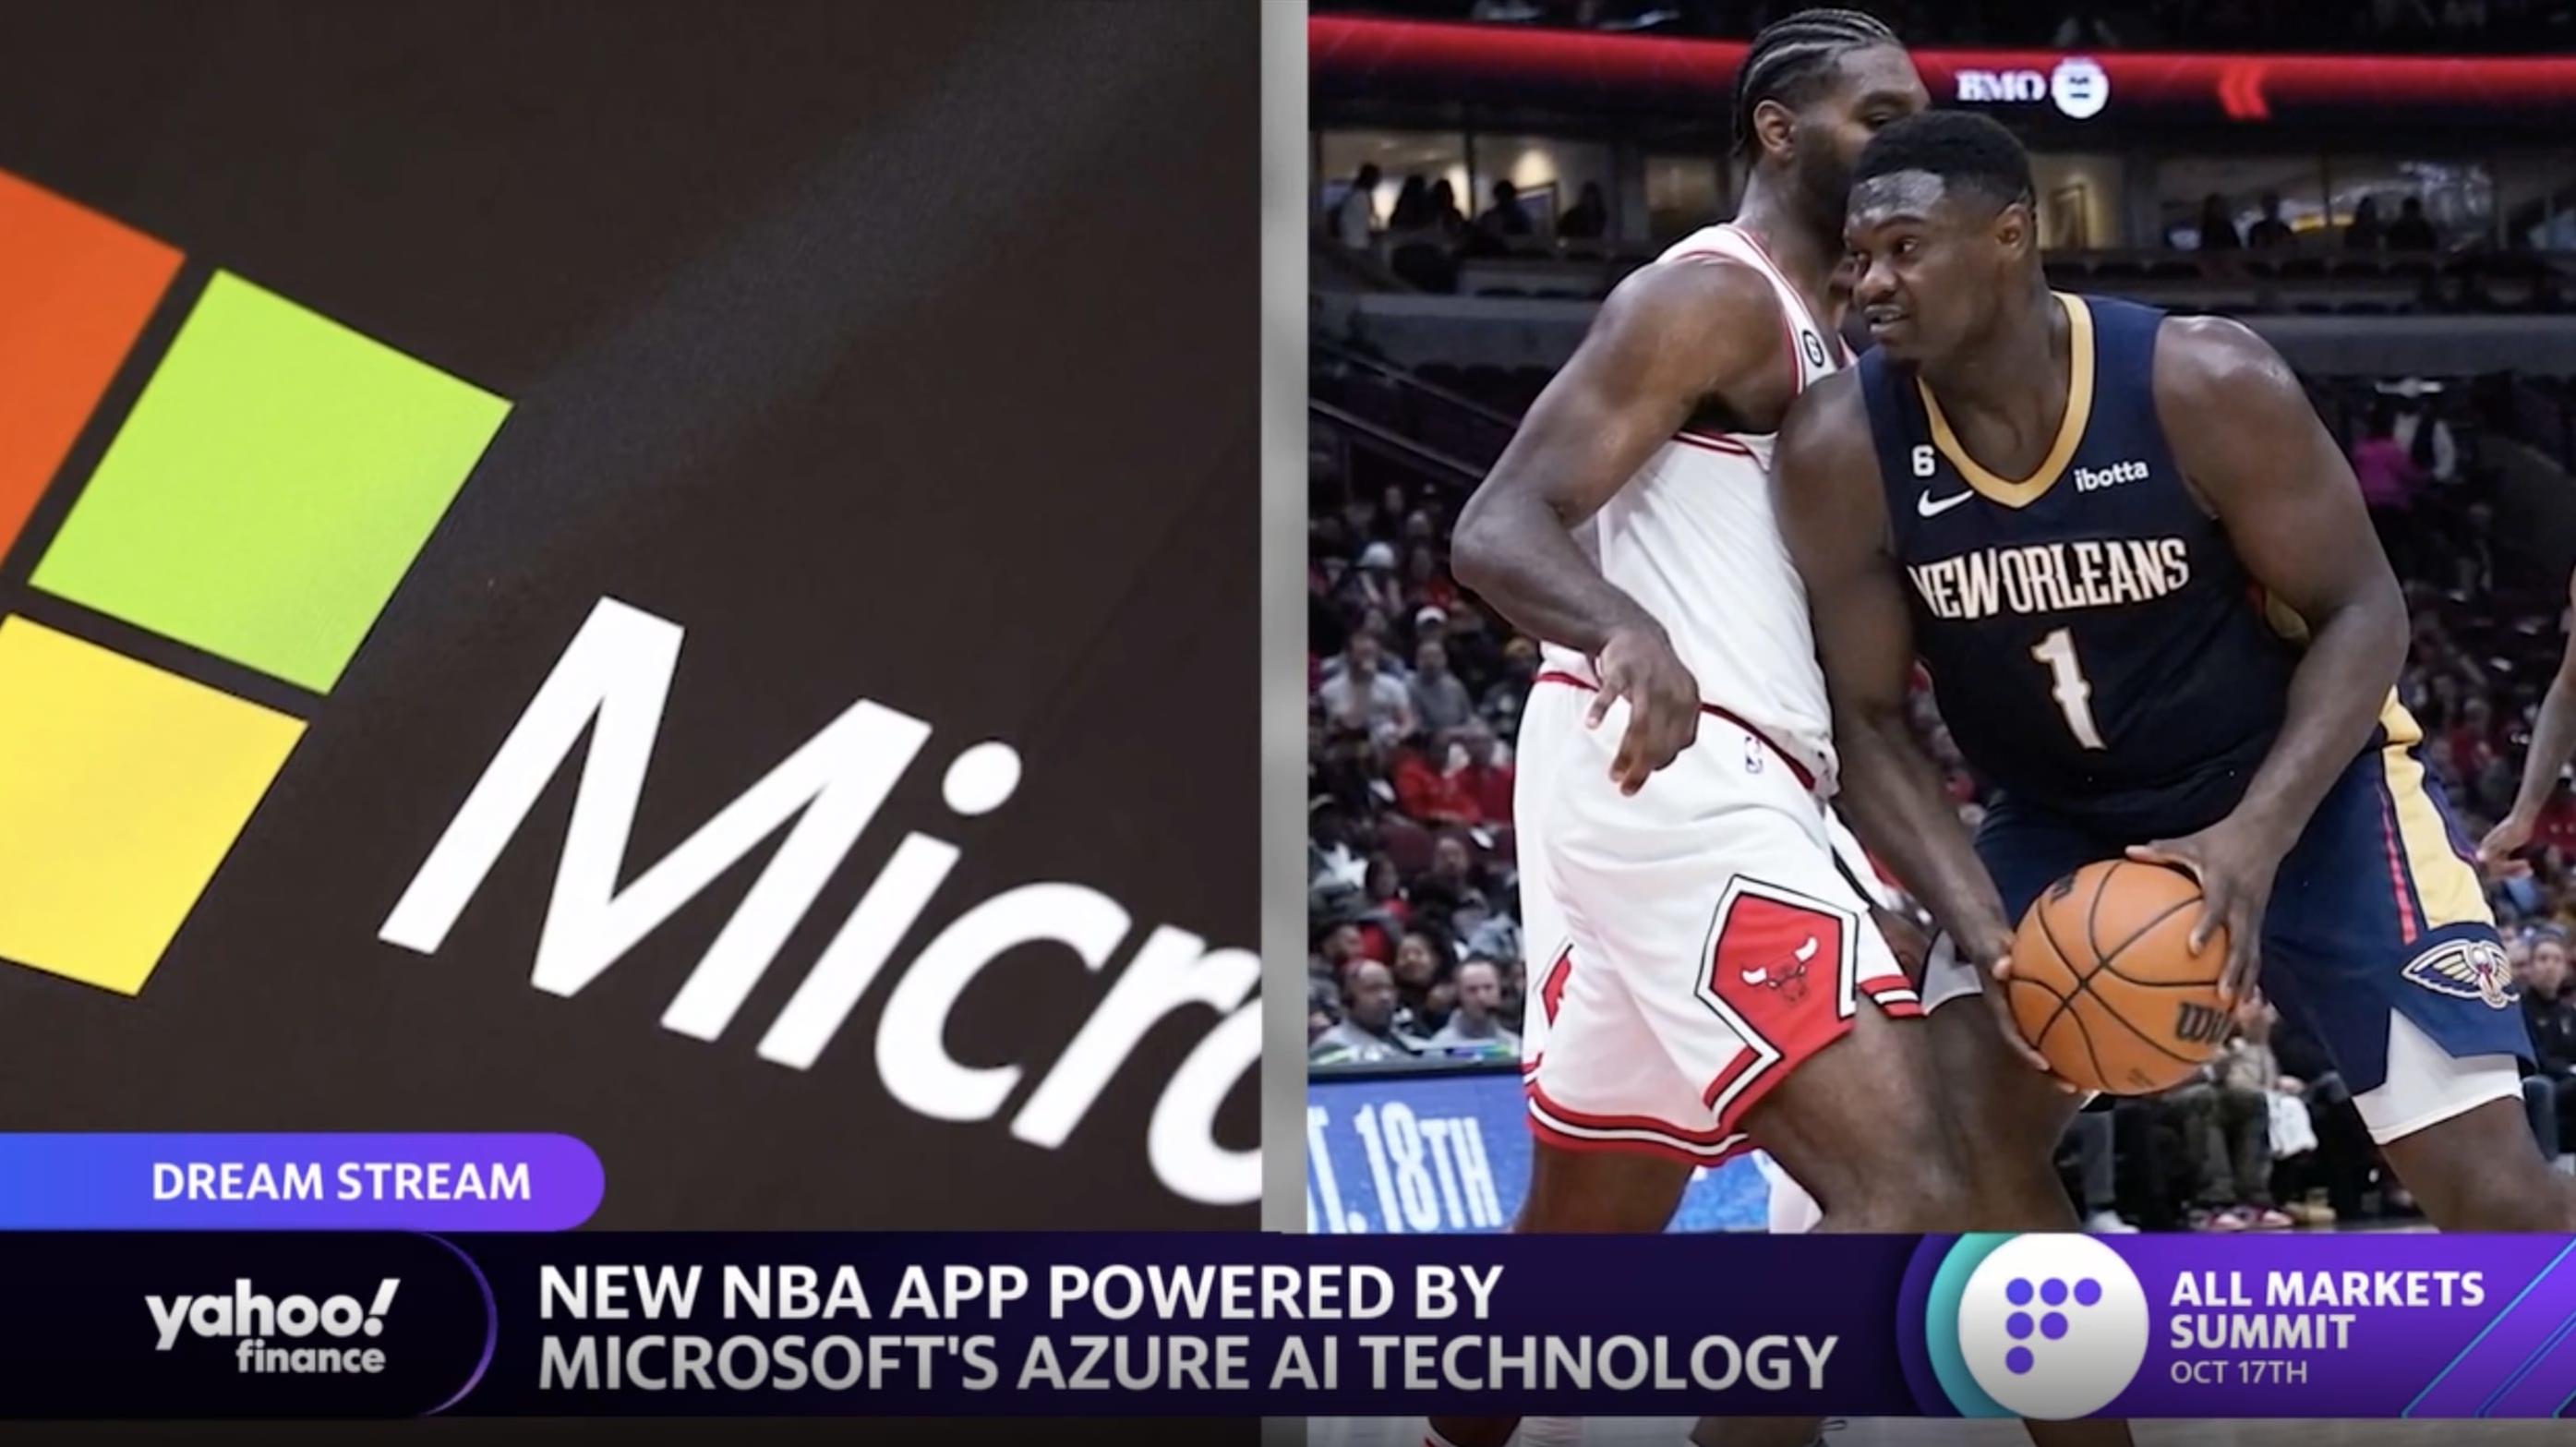 Microsofts new NBA app is just the latest partnership between big tech and sports